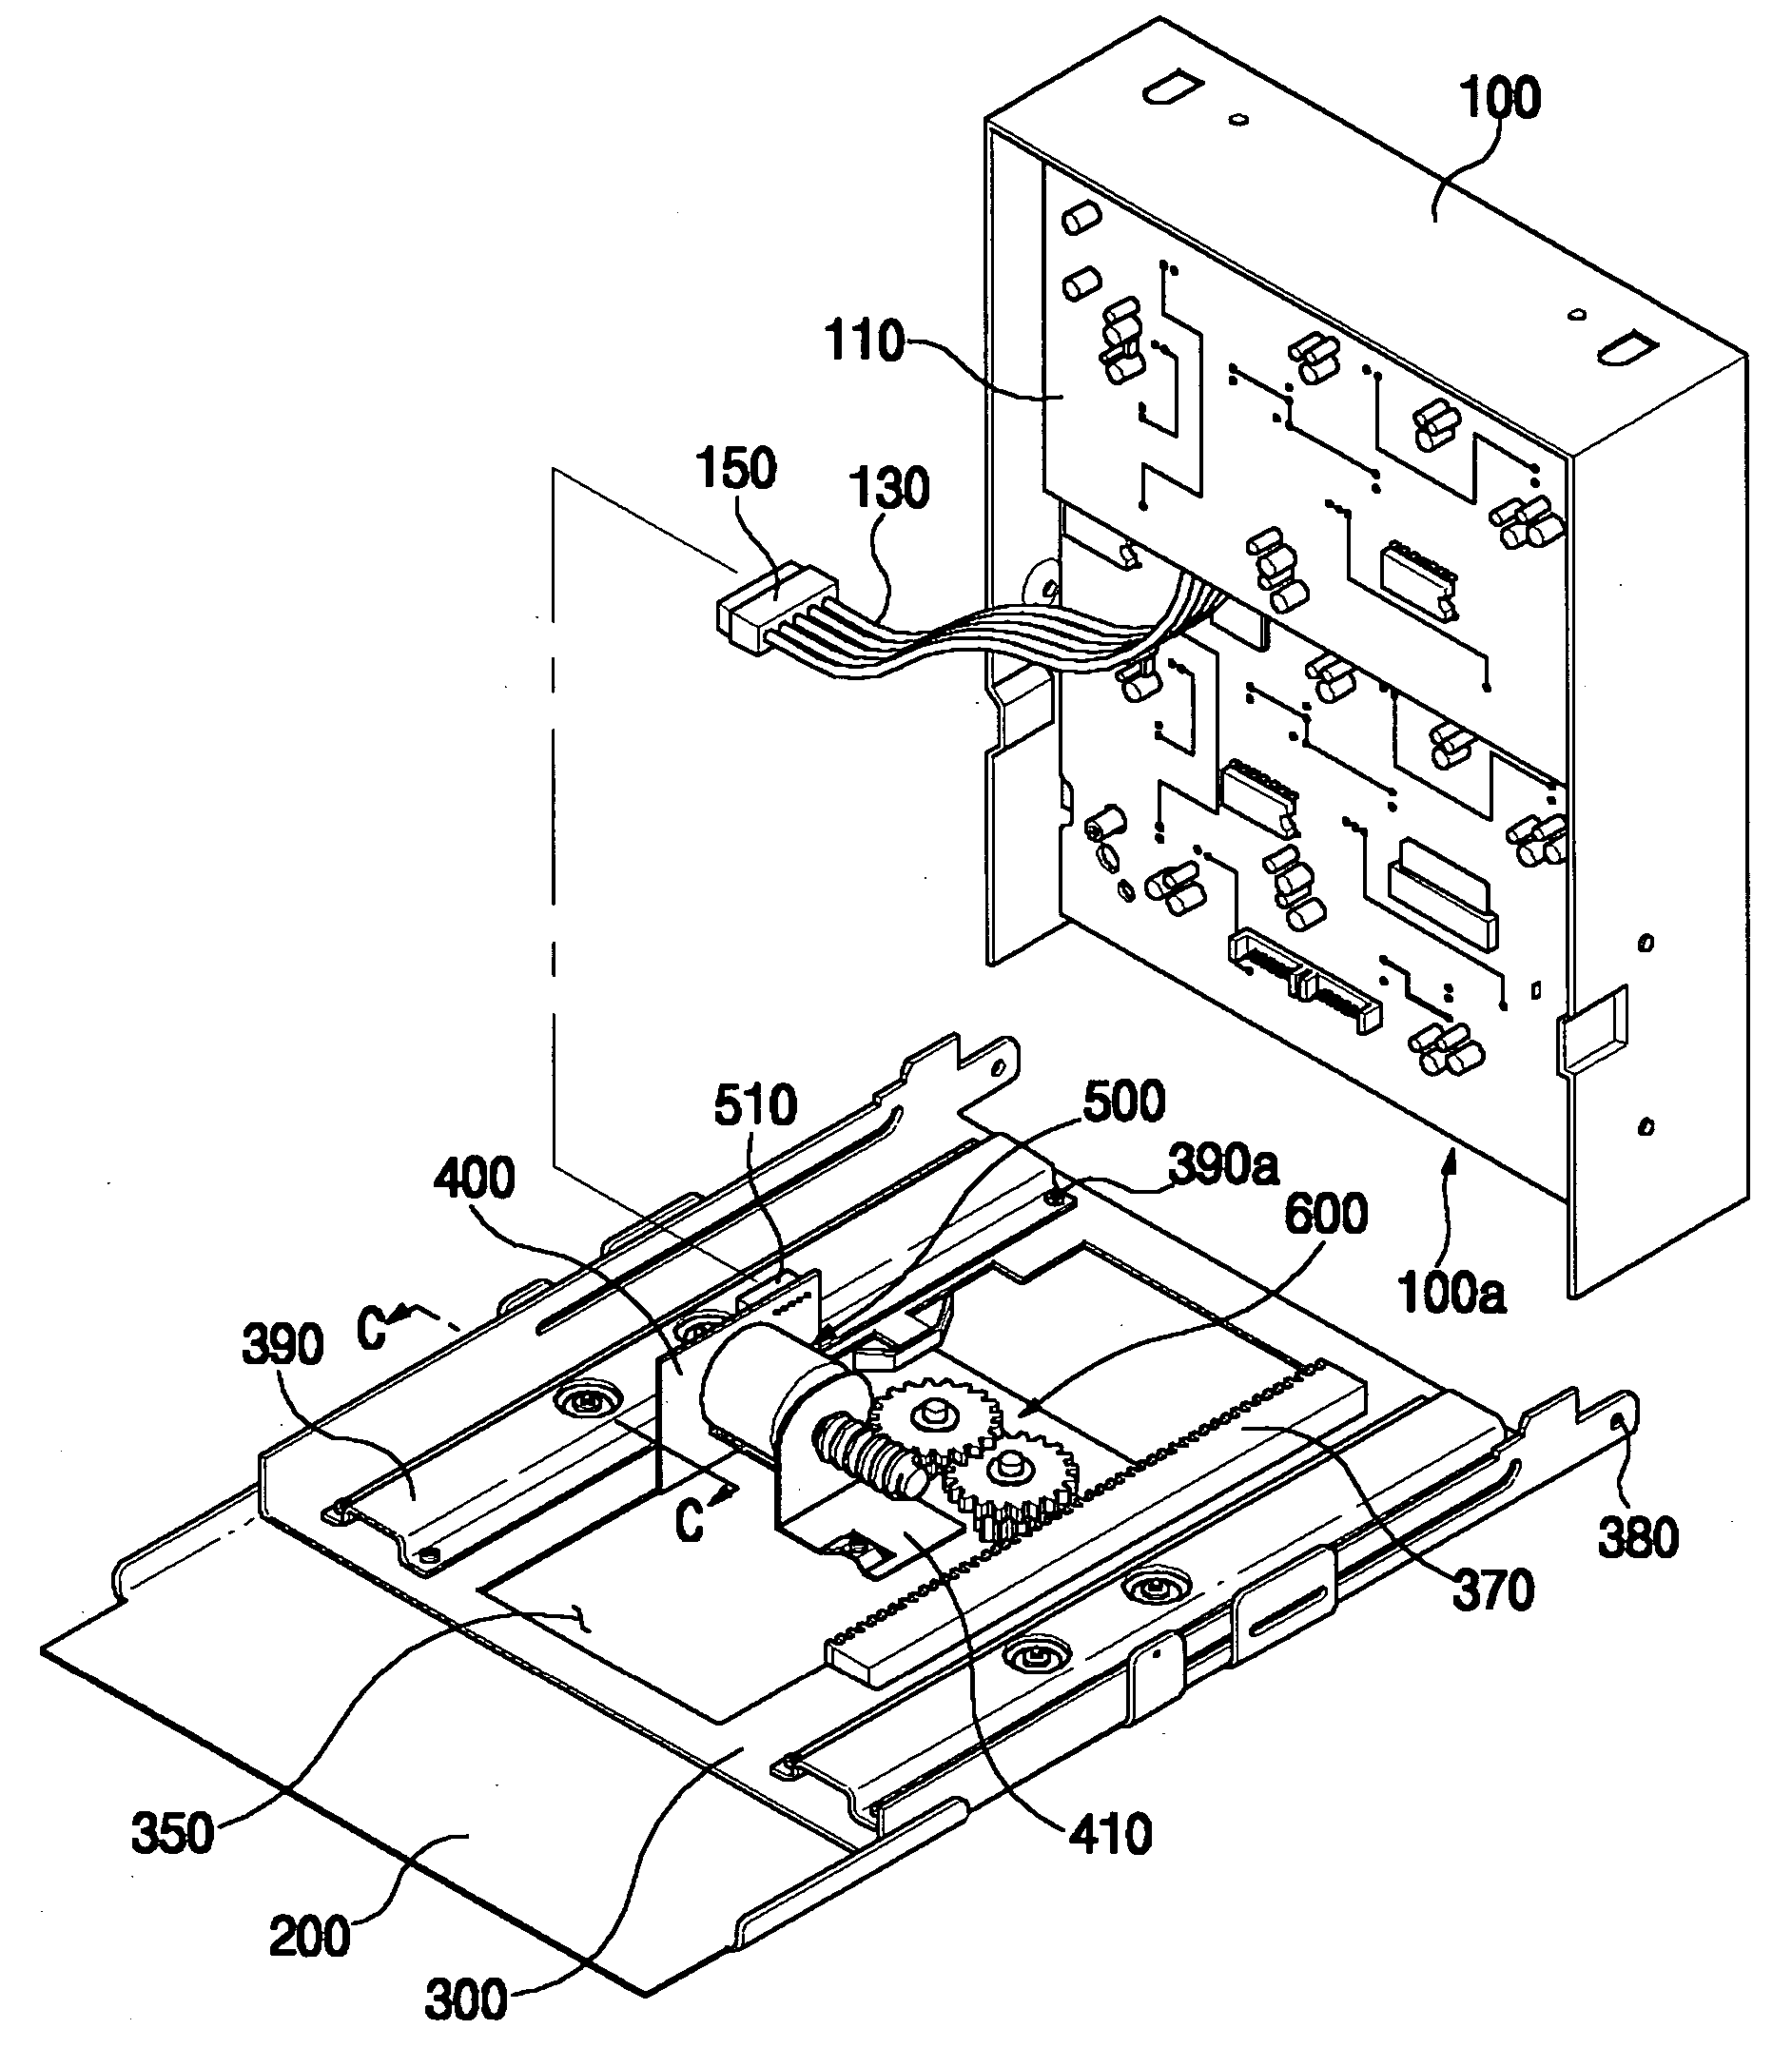 Reinforced slide chassis structure of audio/video system for a vehicle